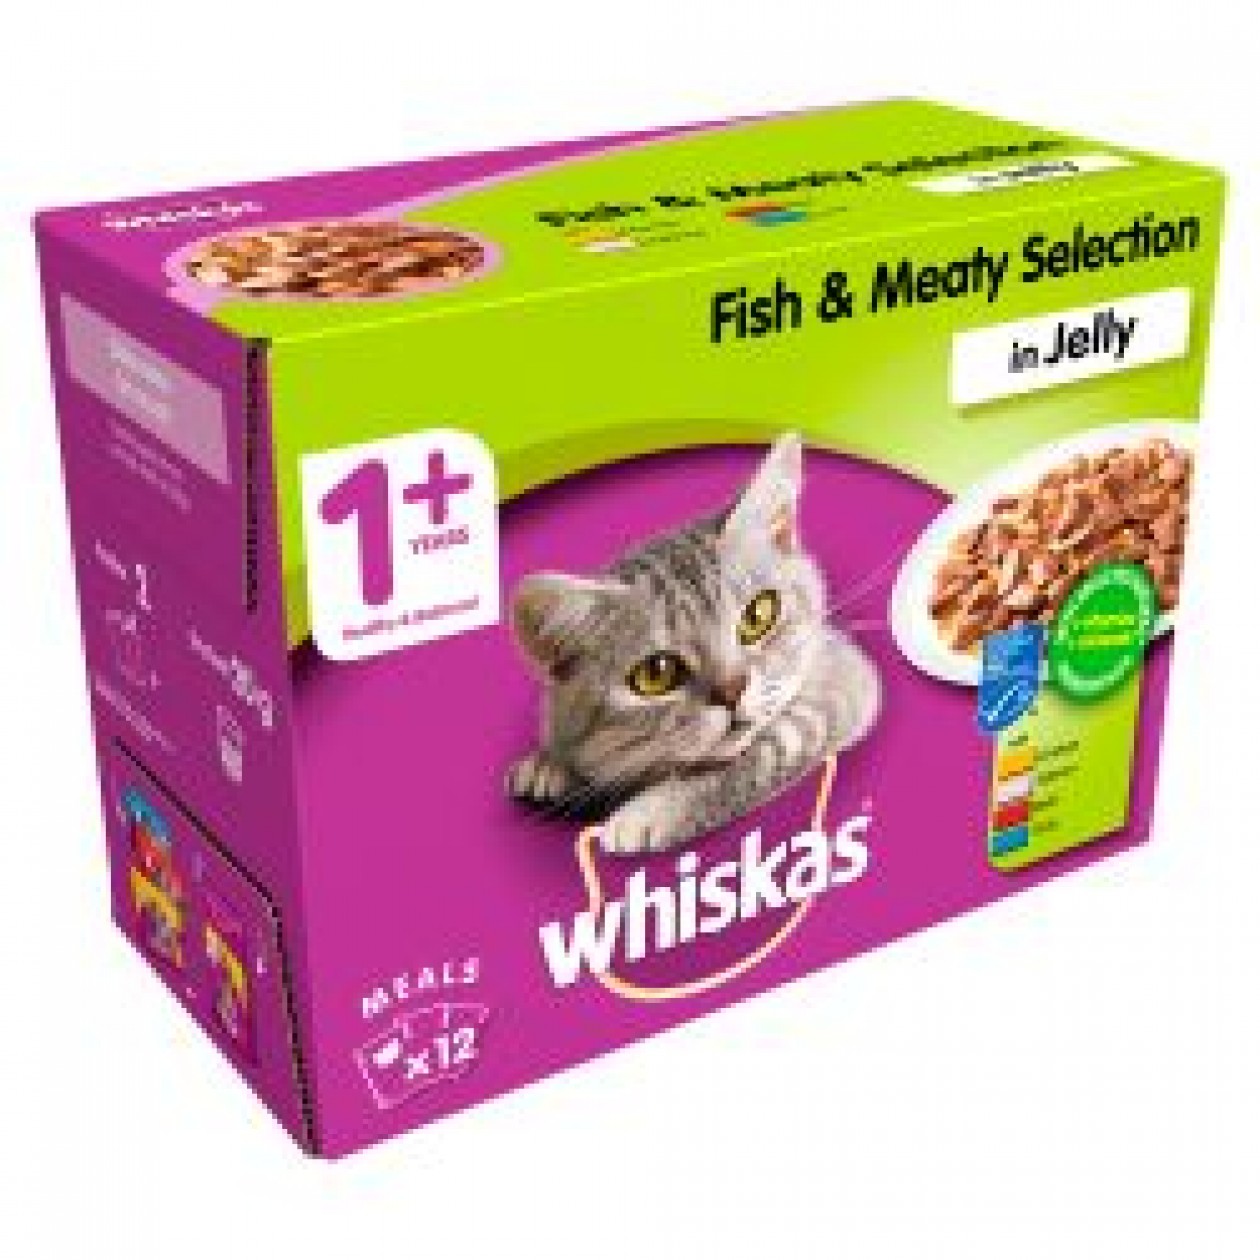 Whiskas Pouch Fish & Meaty Selection in Jelly 12 Pack, 100g